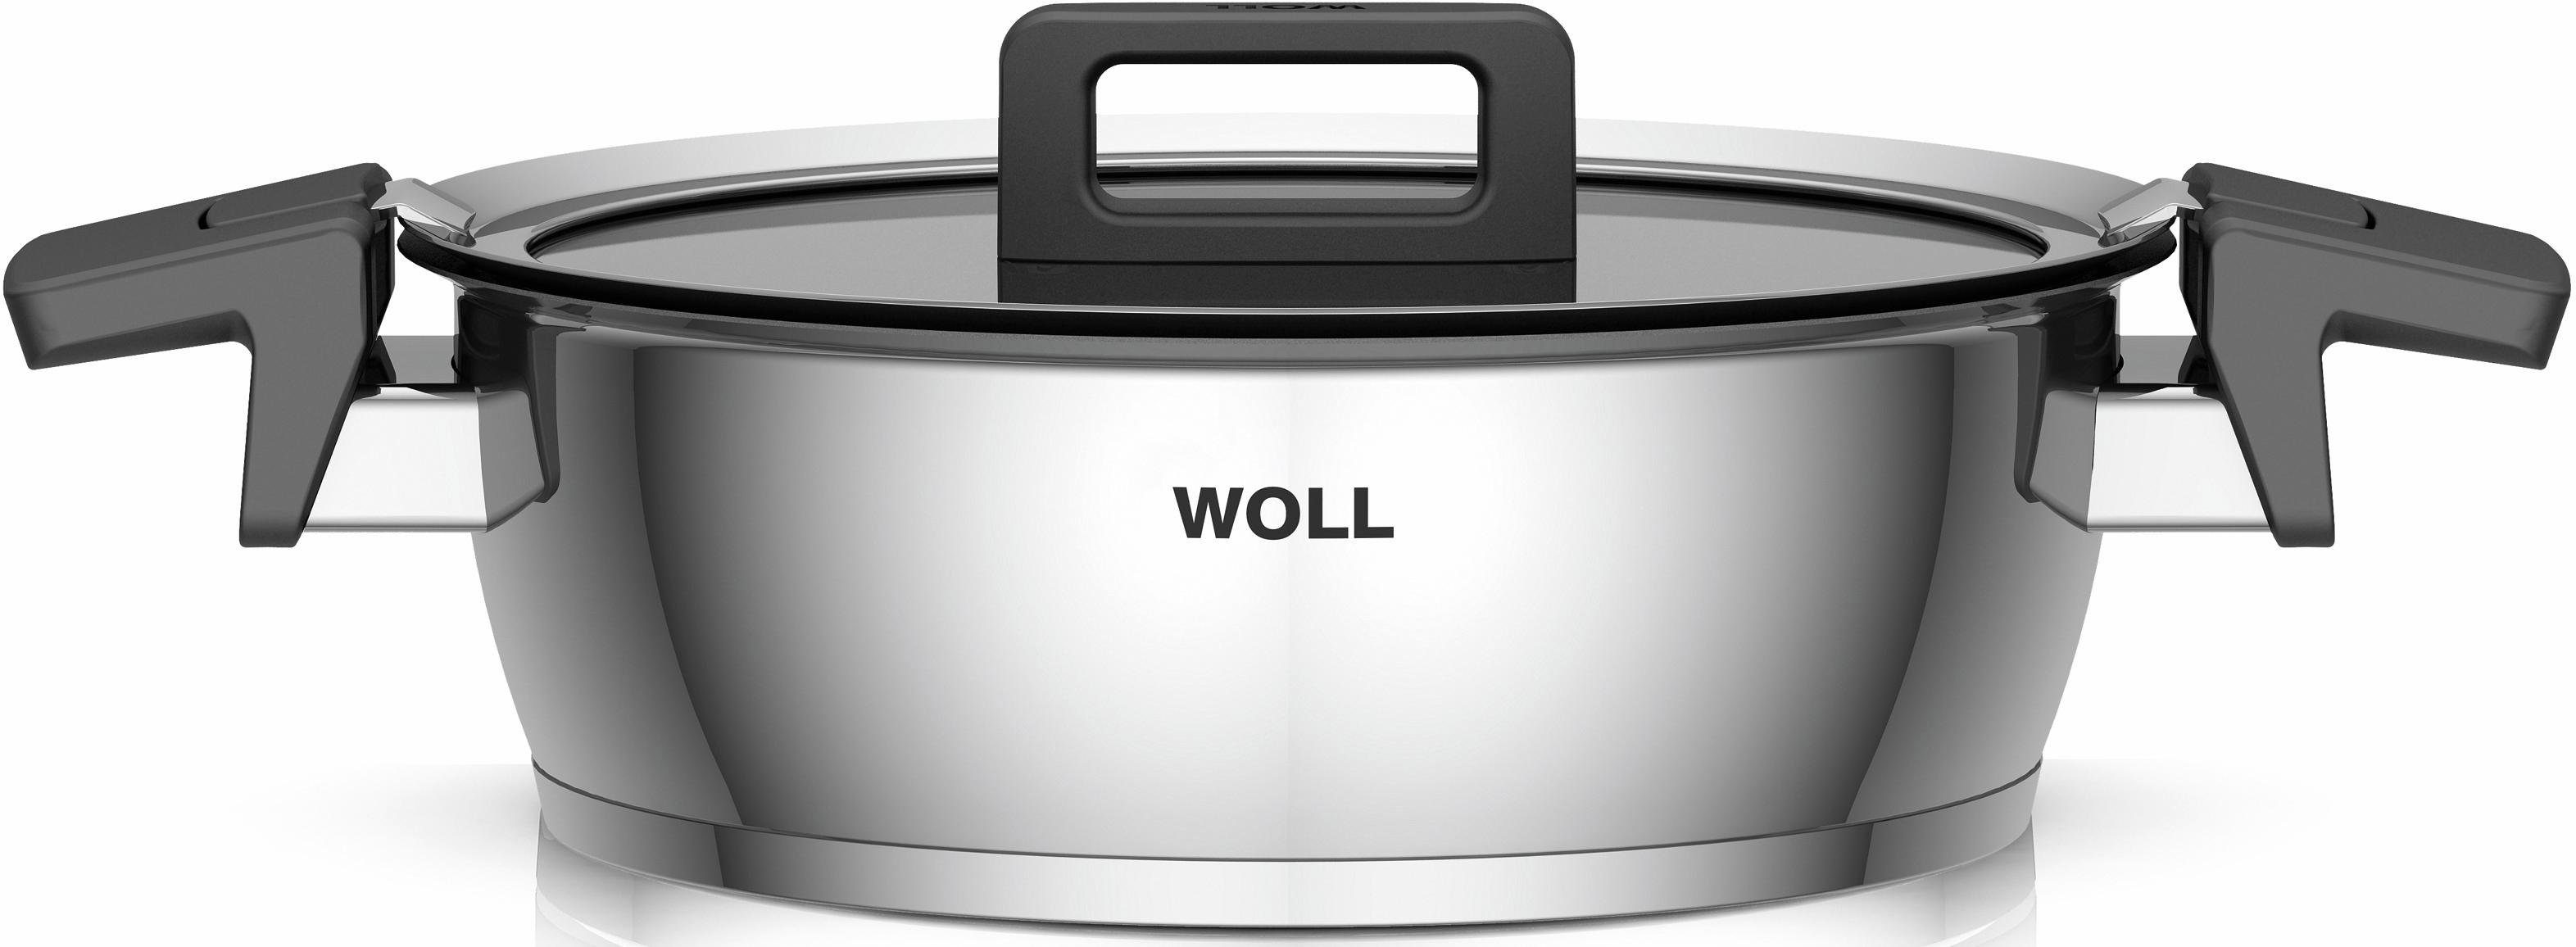 WOLL MADE IN GERMANY WOLL Bratentopf Concept, Edelstahl 18/10 (1-tlg), Induktion